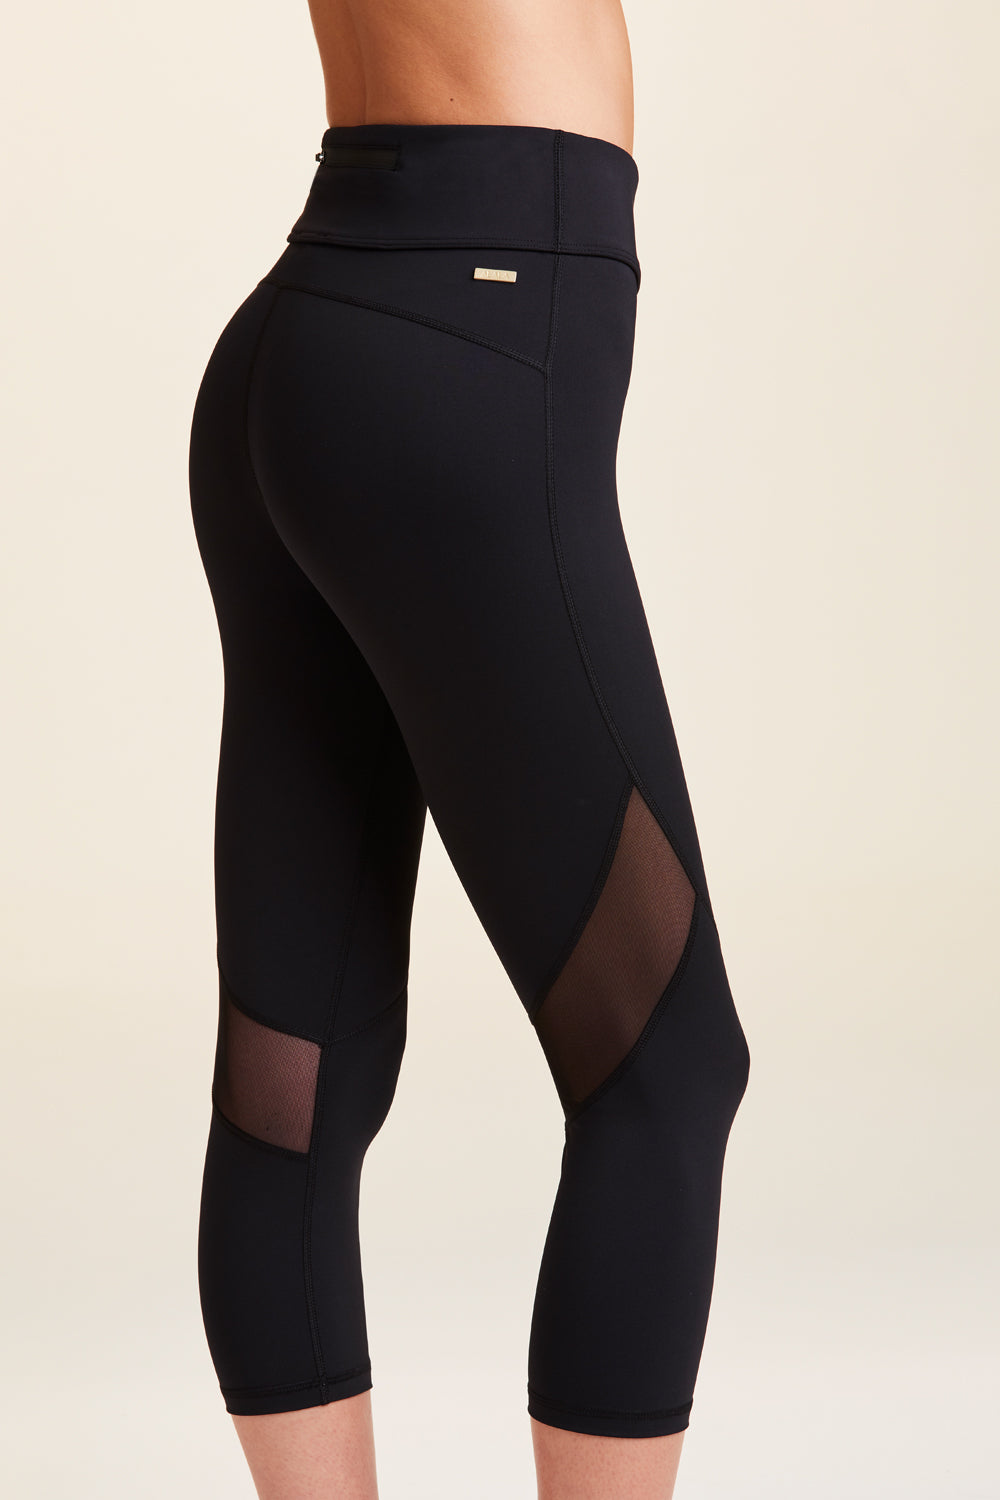 Side view of Alala Women's Luxury Athleisure cropped black tight with mesh paneling on back of knees.